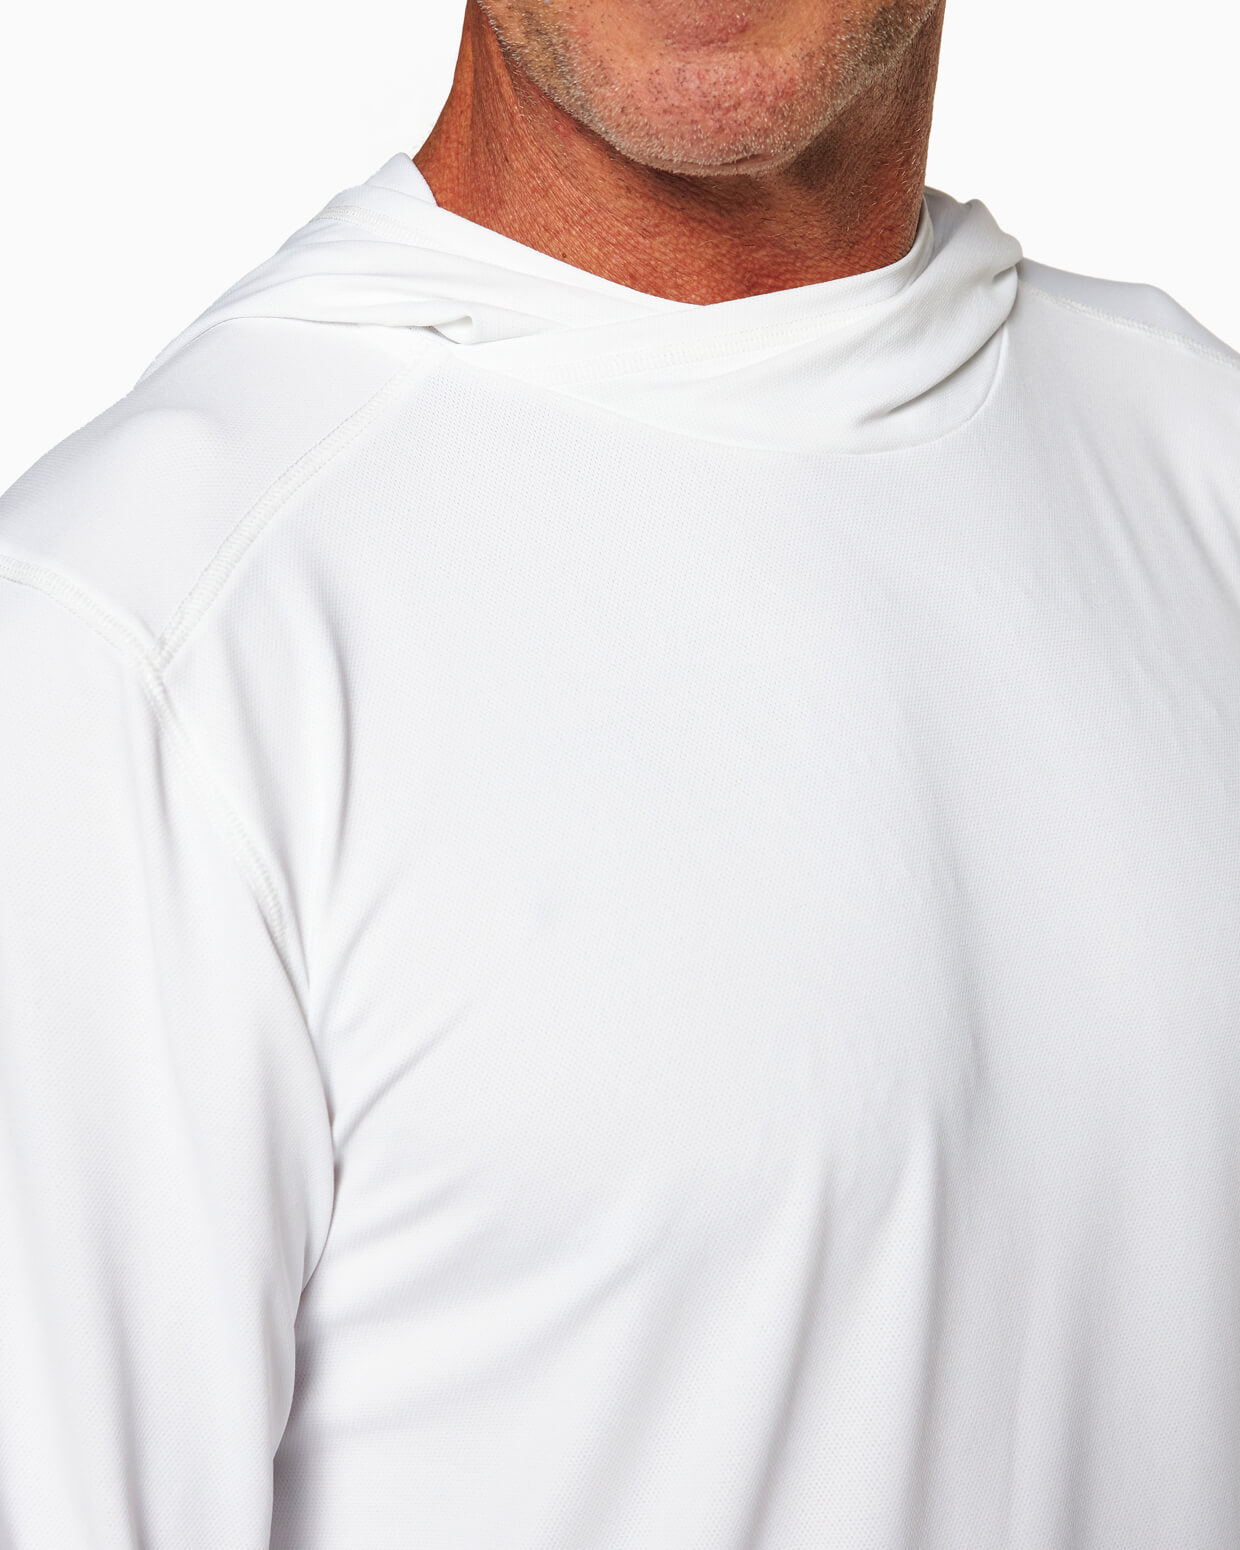 Crows Nest Element Guard | UPF 50+ Long Sleeve UV Protective Shirt